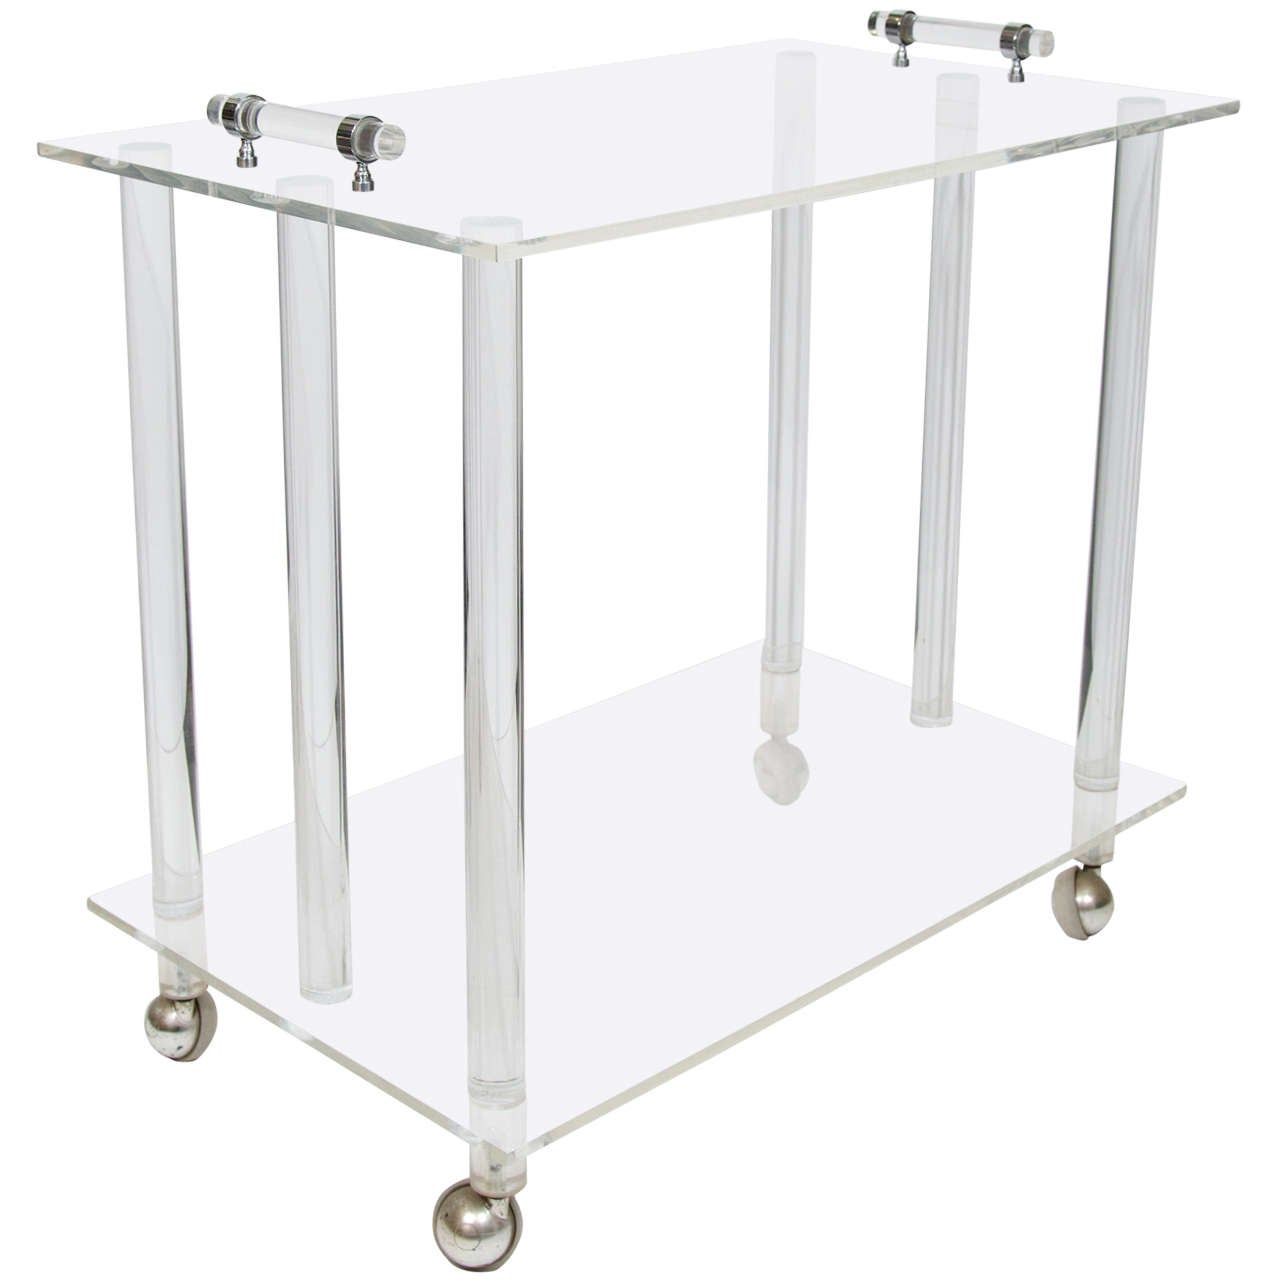 A Midcentury Two-Tier Lucite Service and Bar Cart on Casters